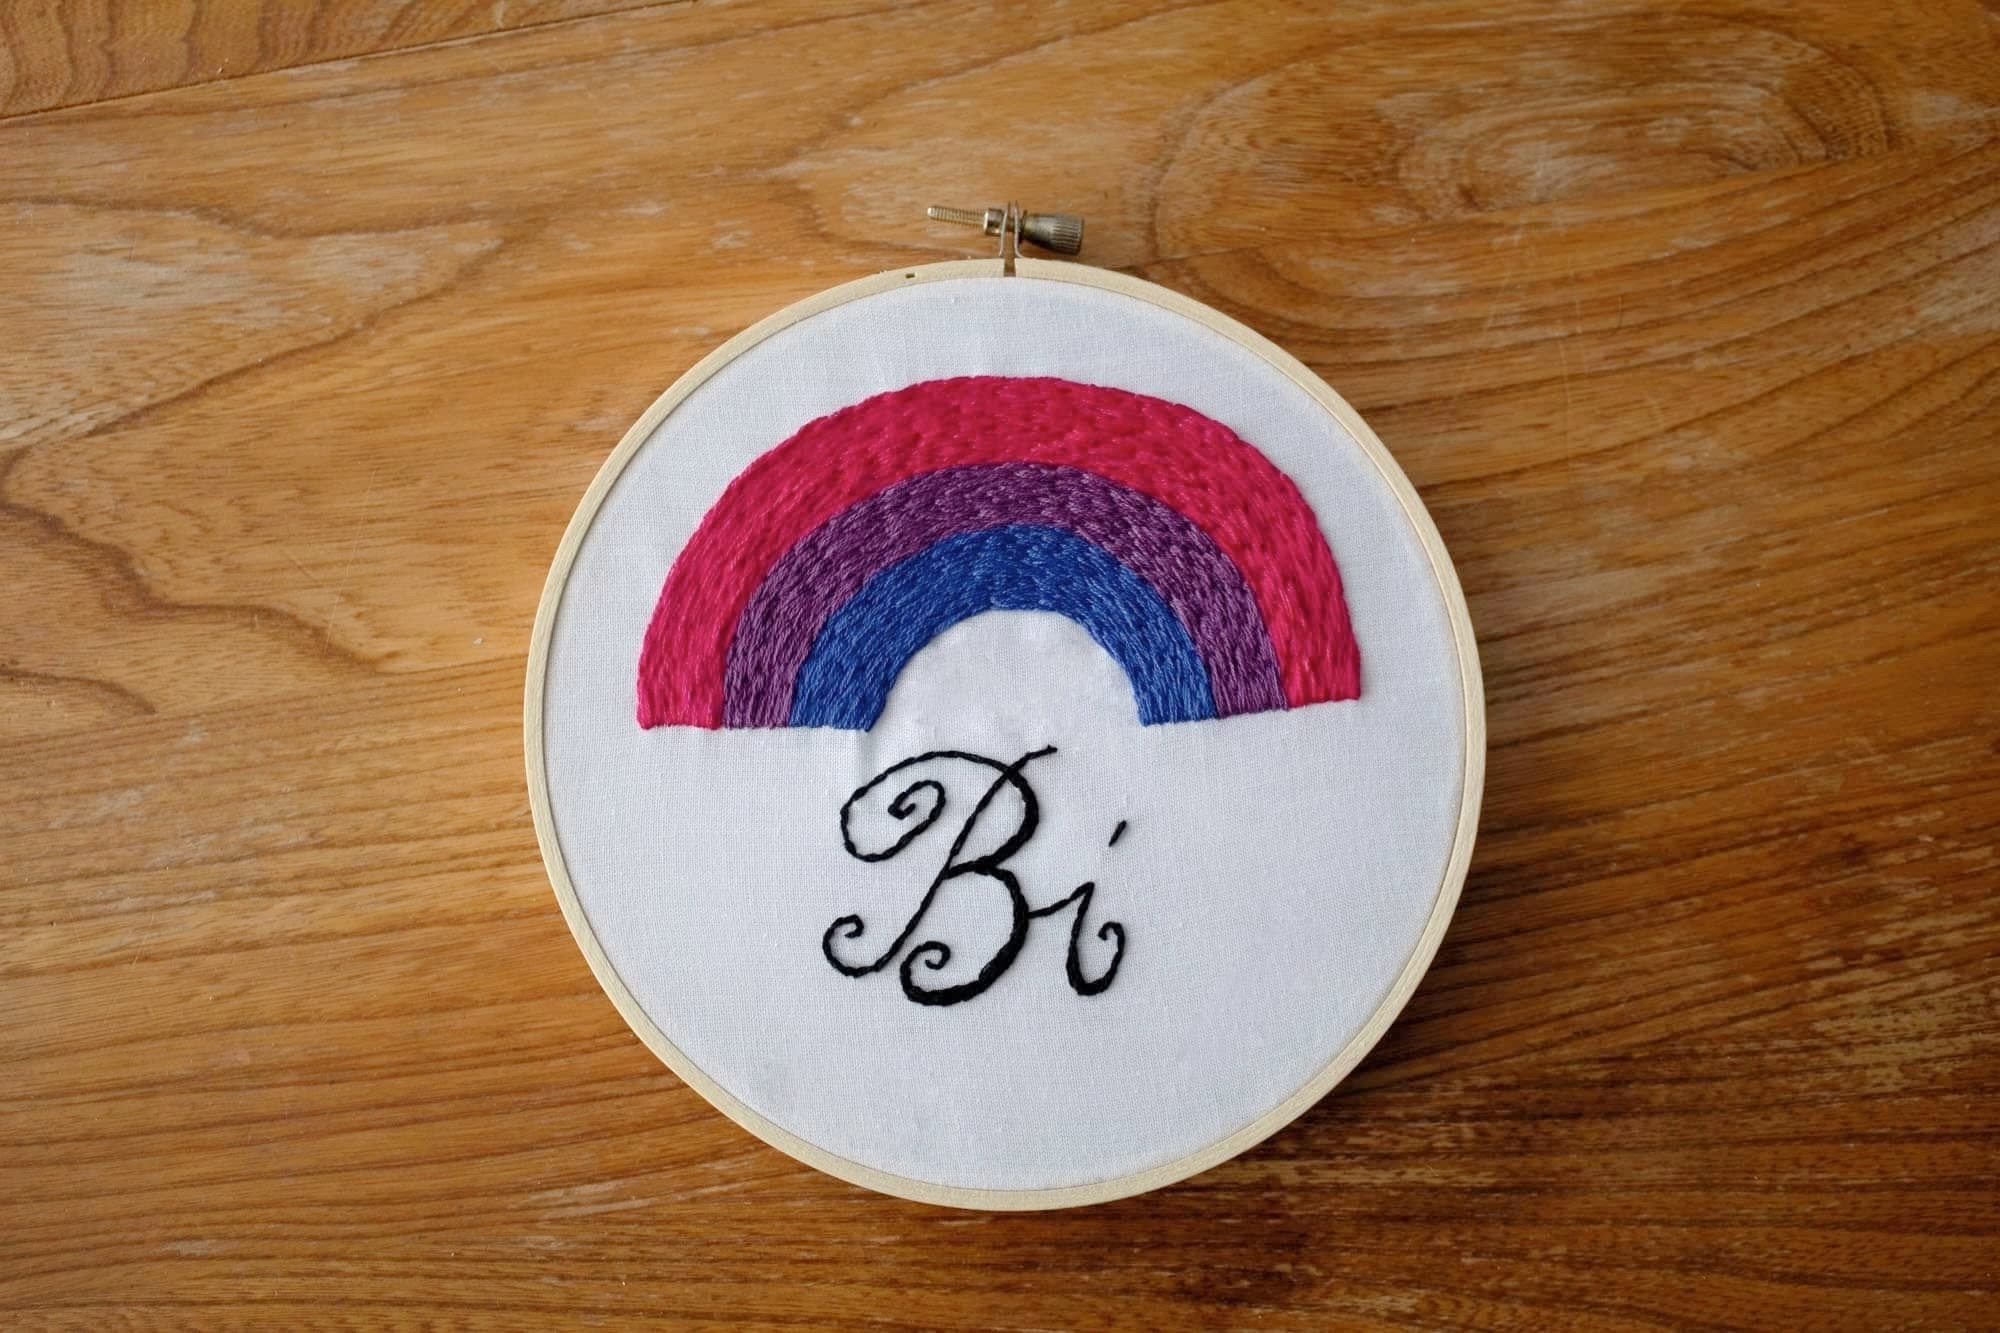 Product image of embroidered rainbow in the bi flag colours with "Bi" written underneath in an italic font on a white fabric background, the whole thing set against a wooden backdrop